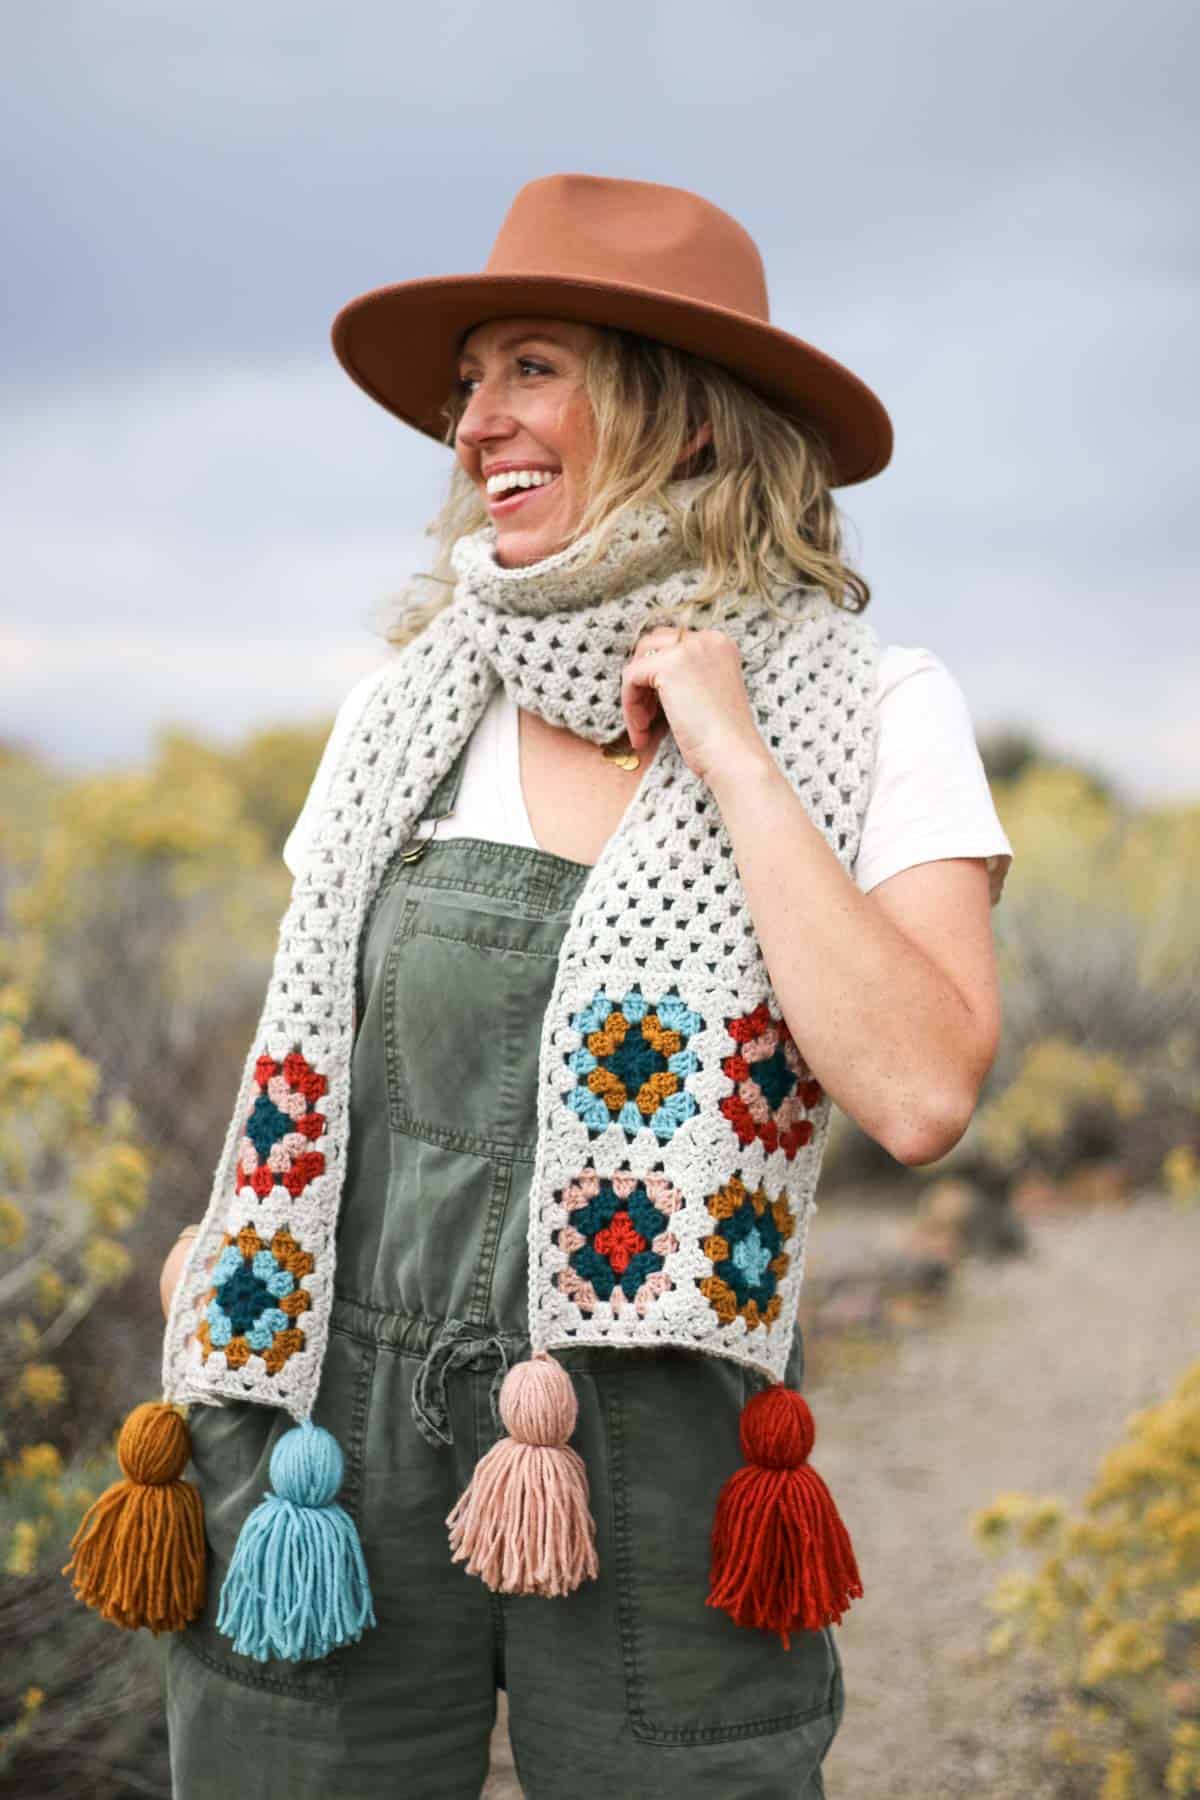 Granny square scarf with tassels modeled by a woman in the desert.